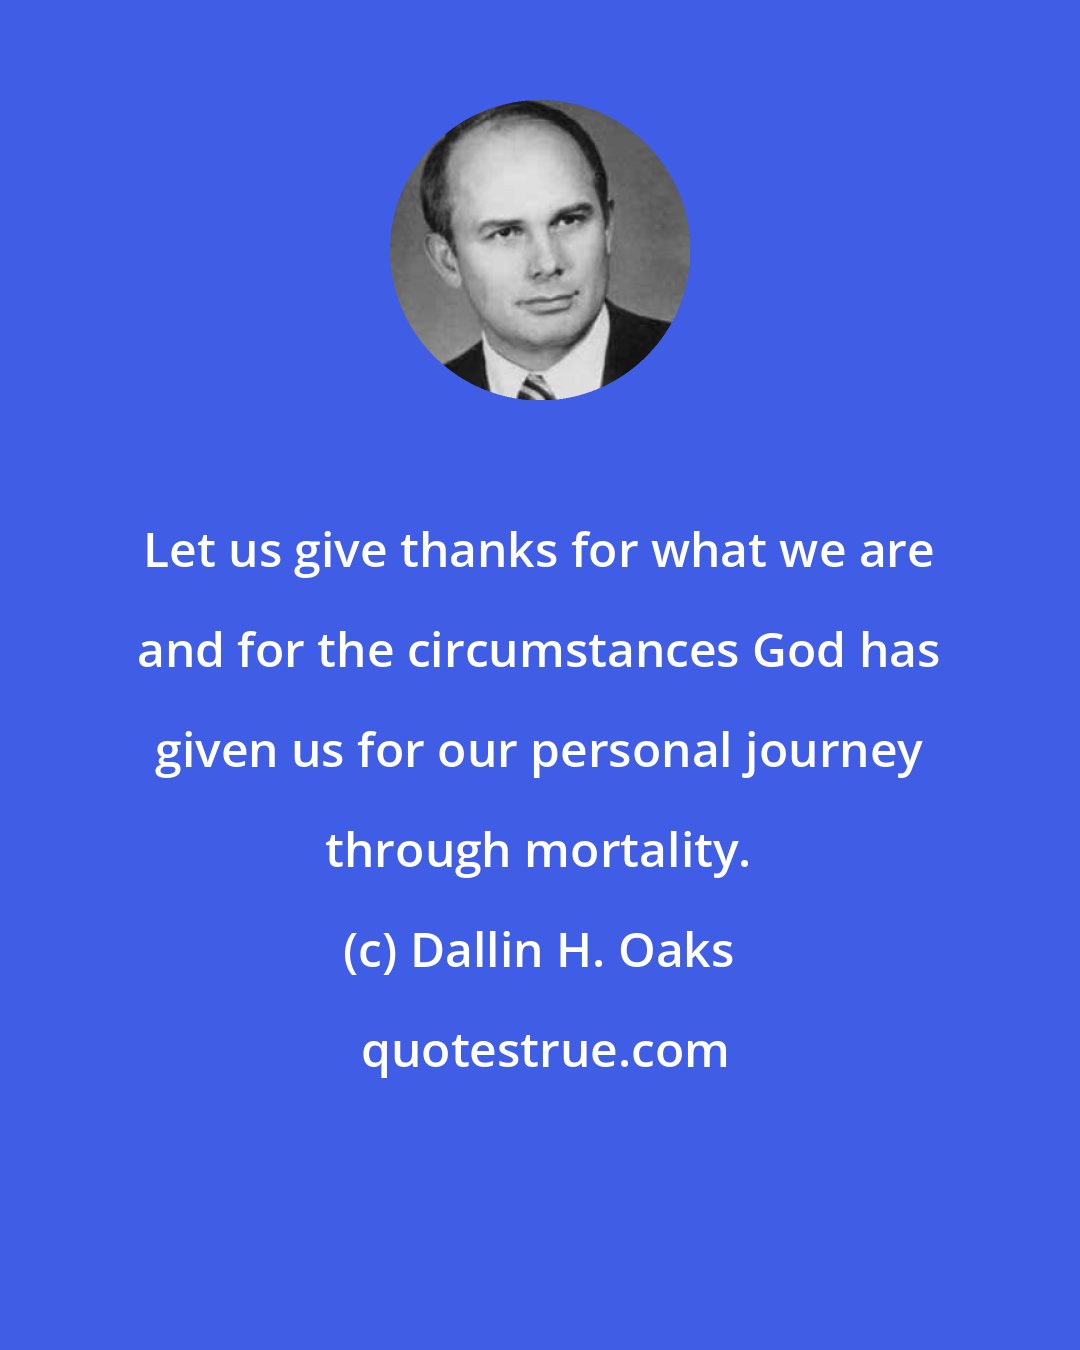 Dallin H. Oaks: Let us give thanks for what we are and for the circumstances God has given us for our personal journey through mortality.